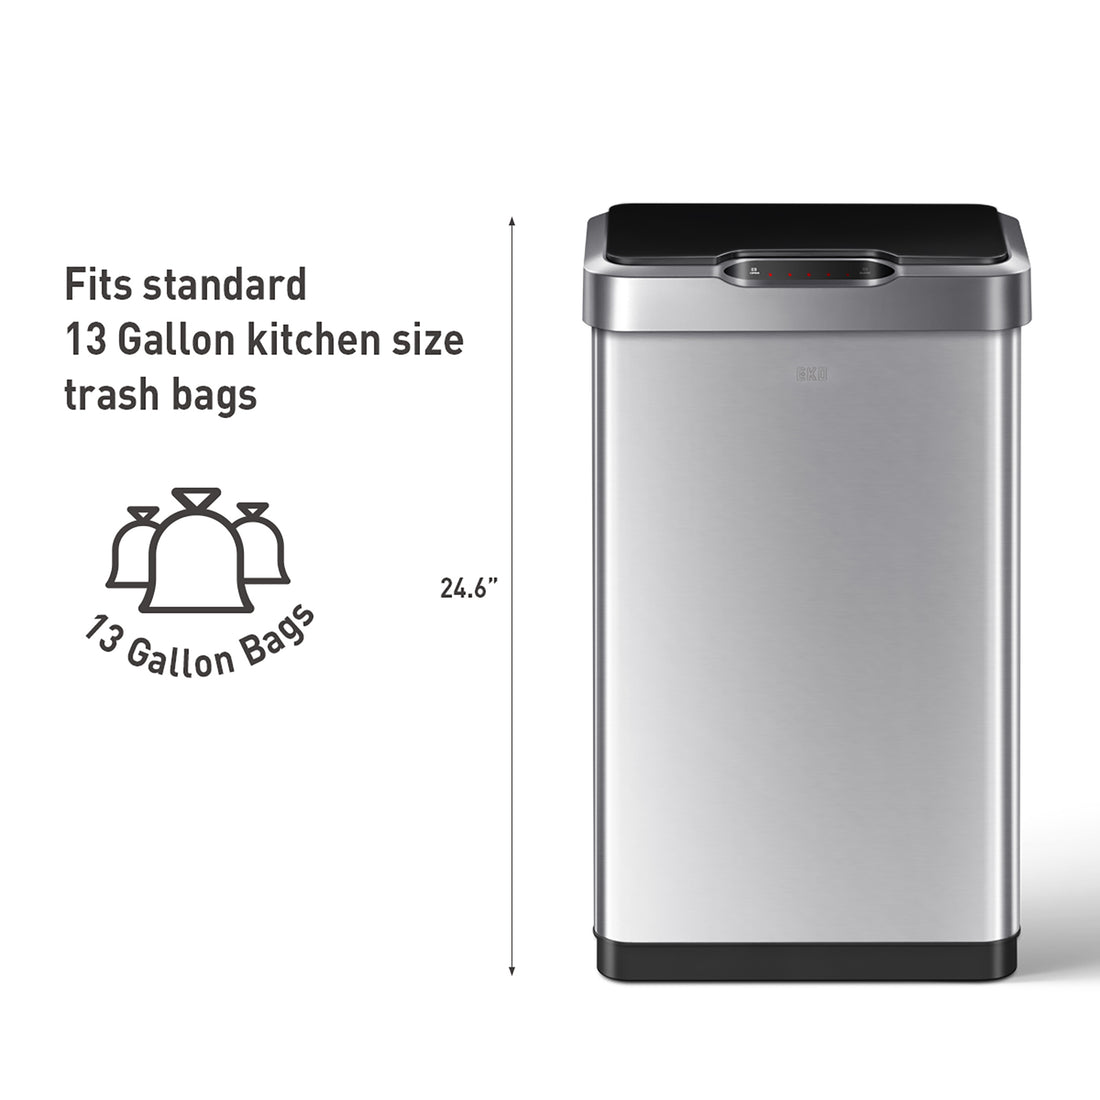 EKO Deluxe Mirage-T 50 liter smart trashcan review - handsfree, cordfree,  and affordable - The Gadgeteer